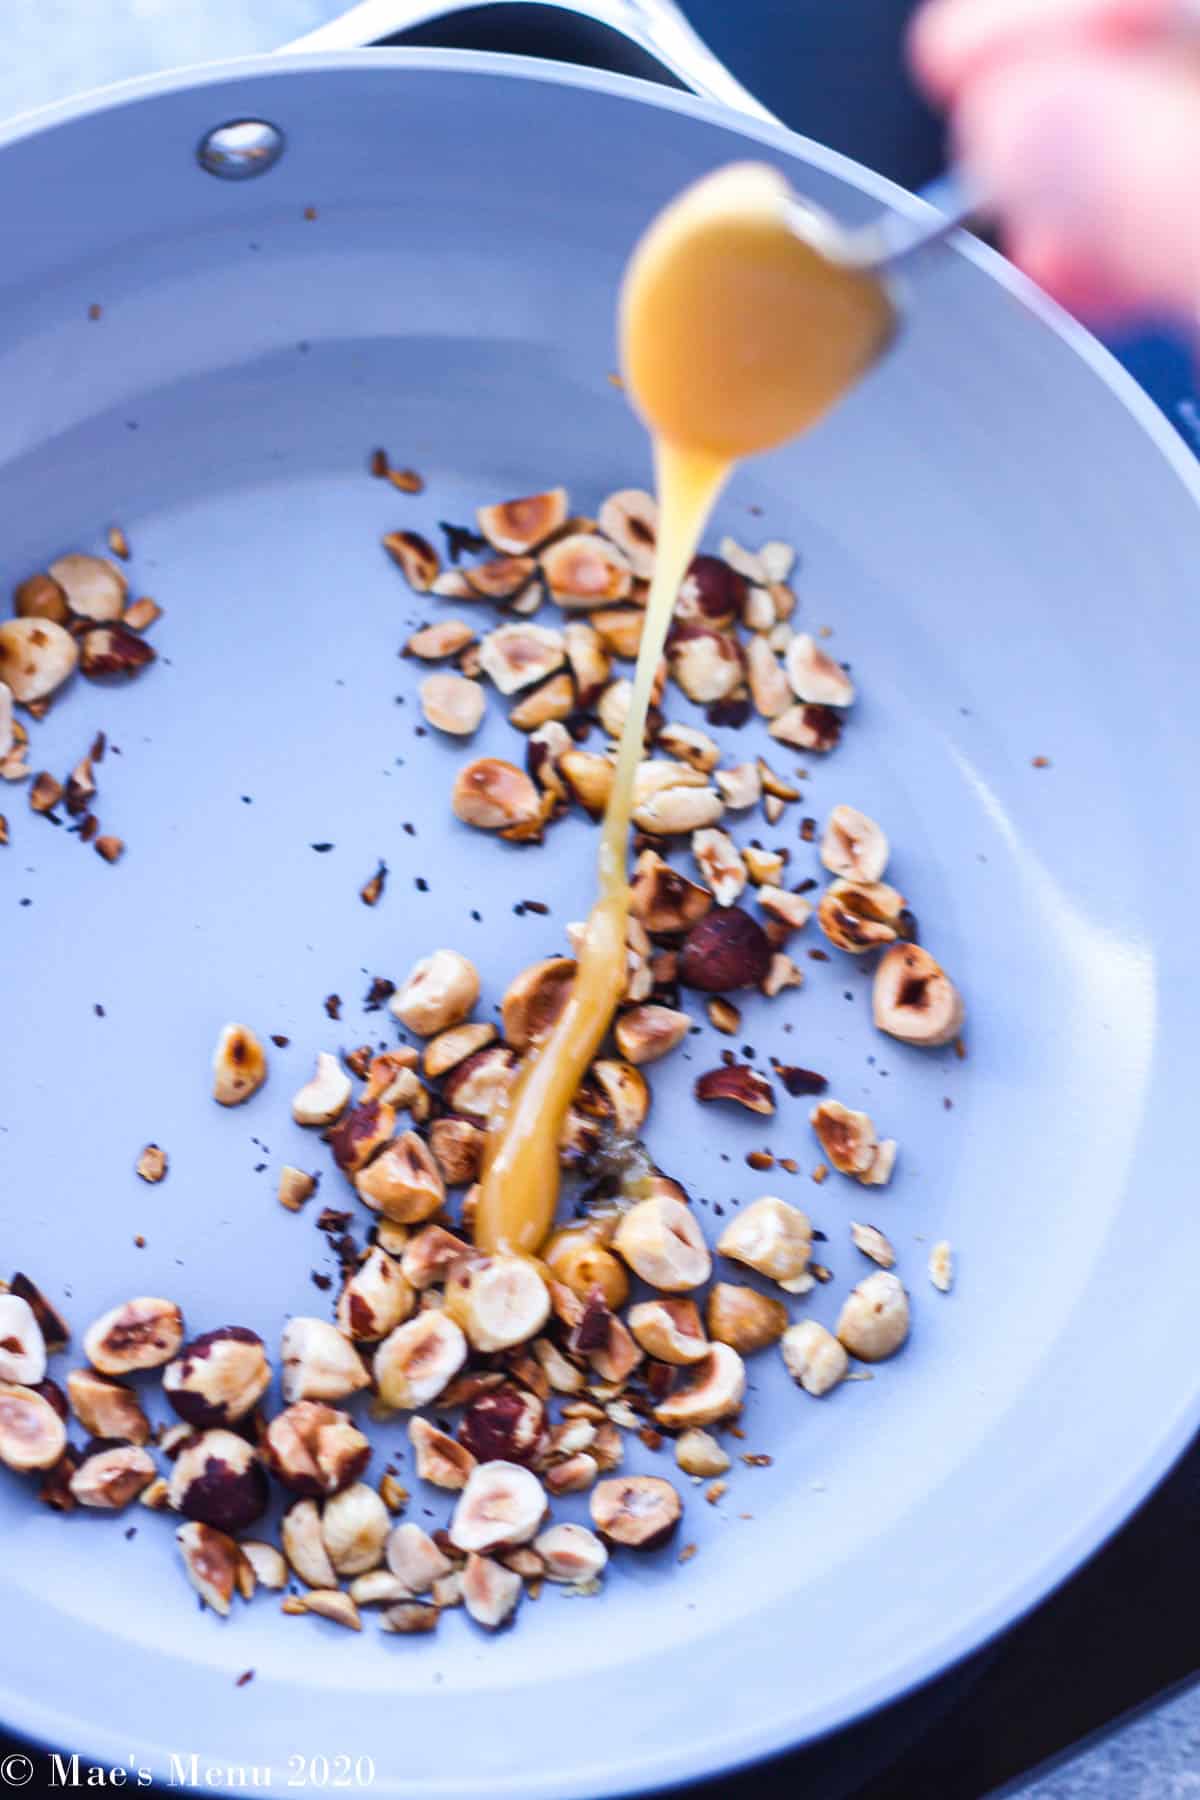 Drizzling honey over a pan of toasted hazelnuts